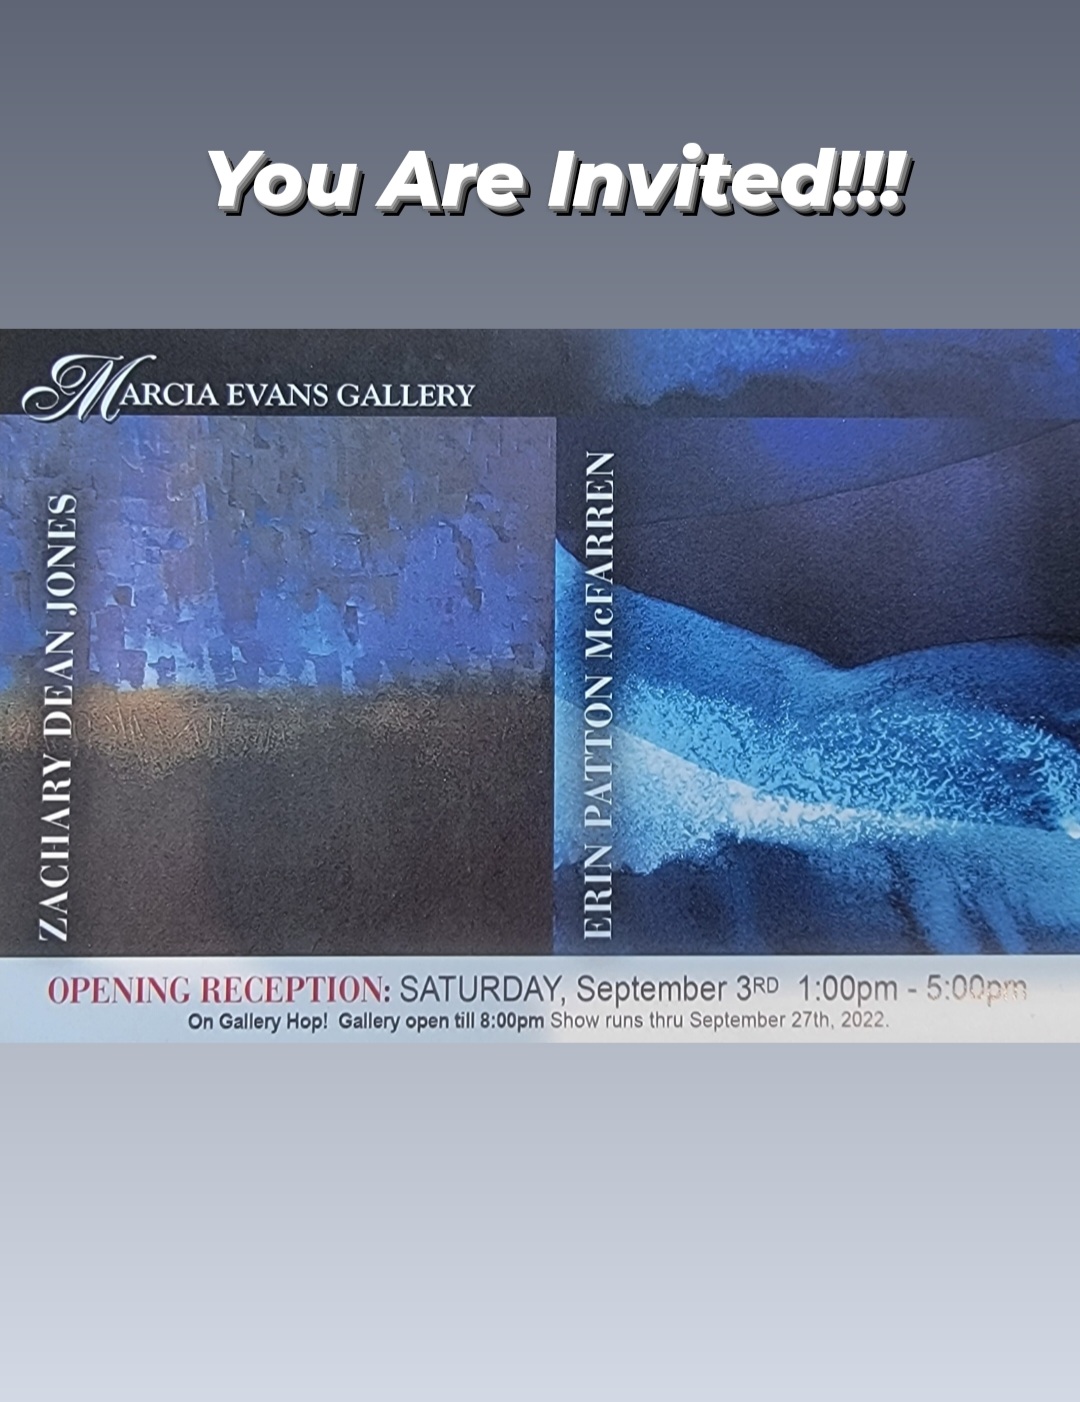 An image of a card promoting an exhibition at the Marcia Evans gallery. It is overlaid on a gray background with text reading: “You are invited!” below that text, there is a card with abstract images on it and text that reads: “Marcia Evans gallery Artist Zachary Dean Jones Opening reception Saturday September 3rd 1 p.m. to 5 p.m. On gallery hop! Gallery open until 8pm. show runs through september 27, 2022